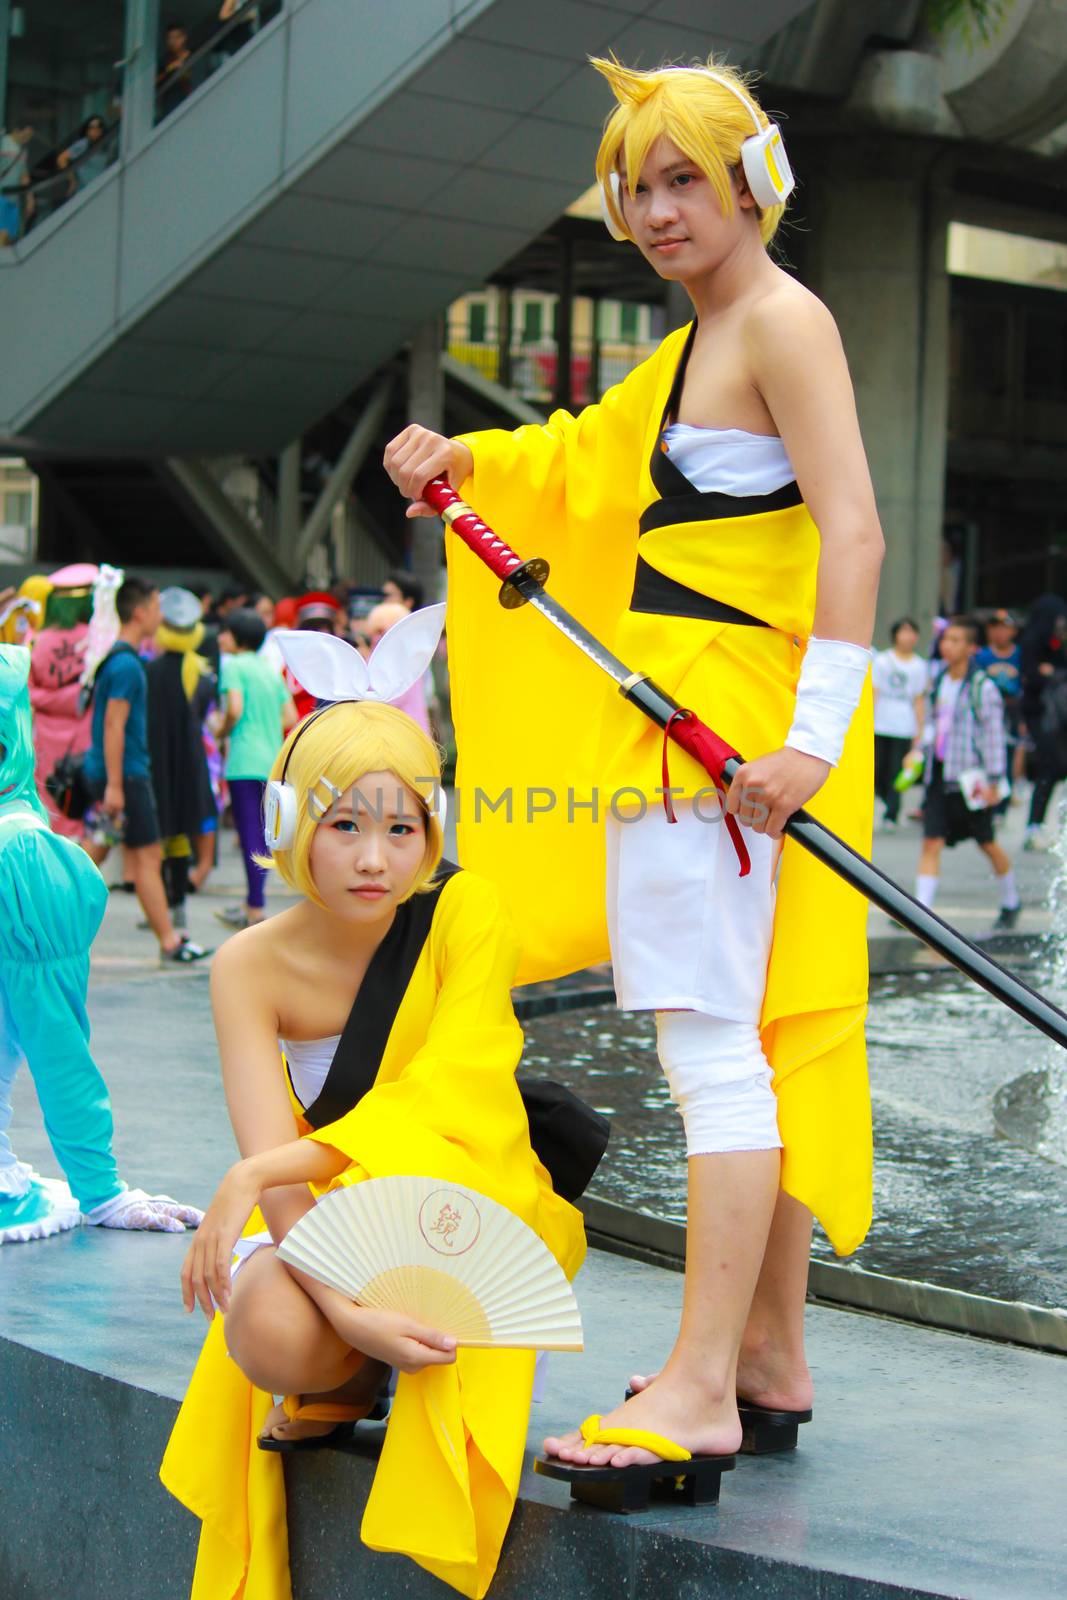 Bangkok - Aug 31: An unidentified Japanese anime cosplay Rin and Len pose  on August 31, 2014 at Central World, Bangkok, Thailand.